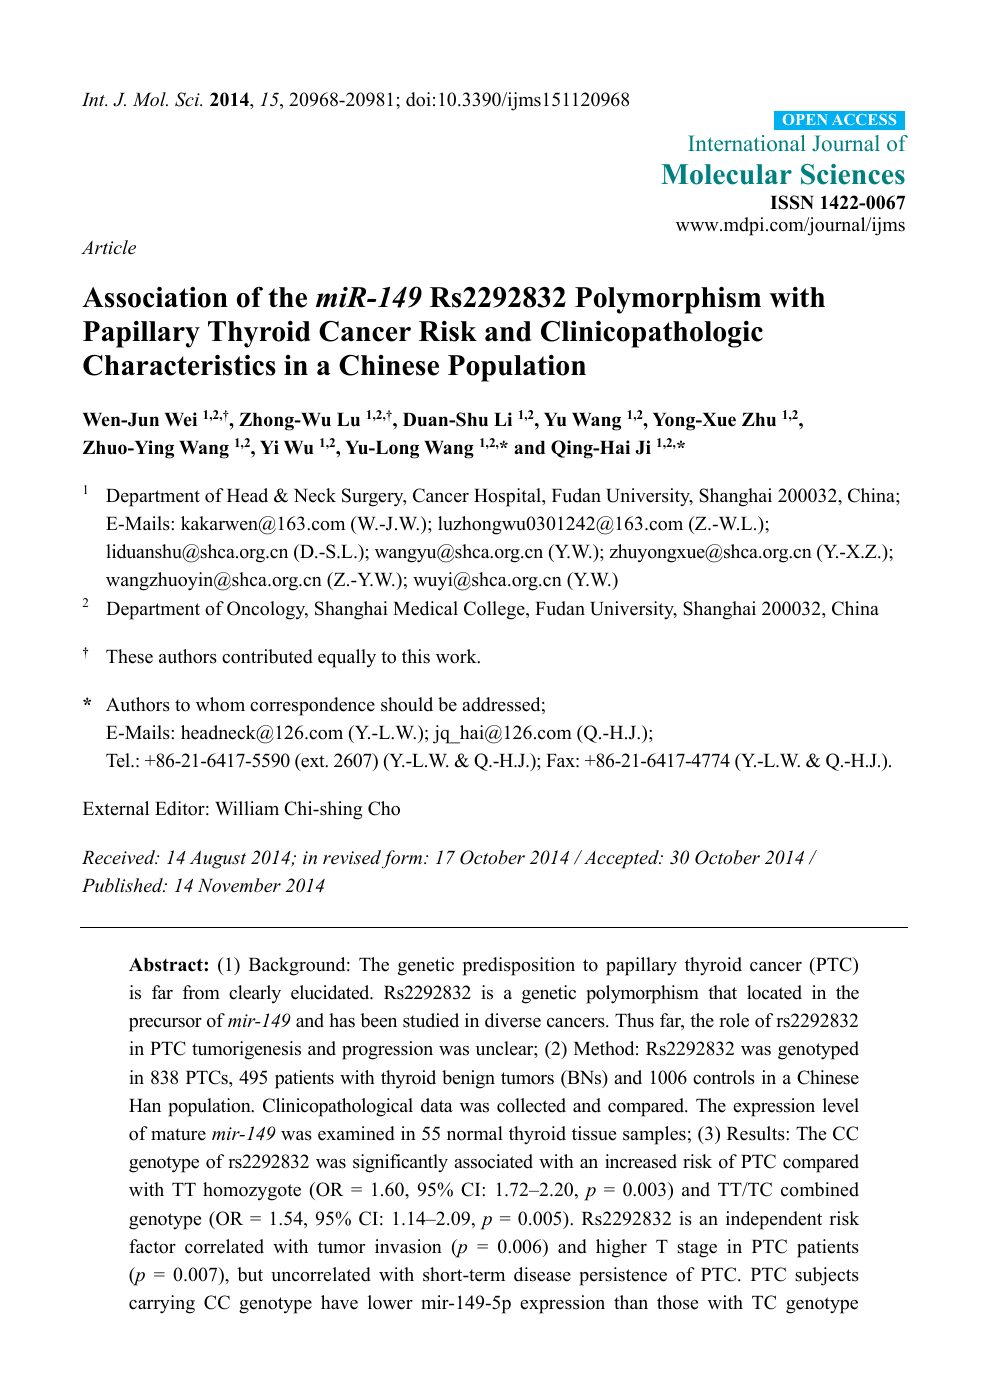 Association Of The Mir 149 Rs Polymorphism With Papillary Thyroid Cancer Risk And Clinicopathologic Characteristics In A Chinese Population Topic Of Research Paper In Biological Sciences Download Scholarly Article Pdf And Read